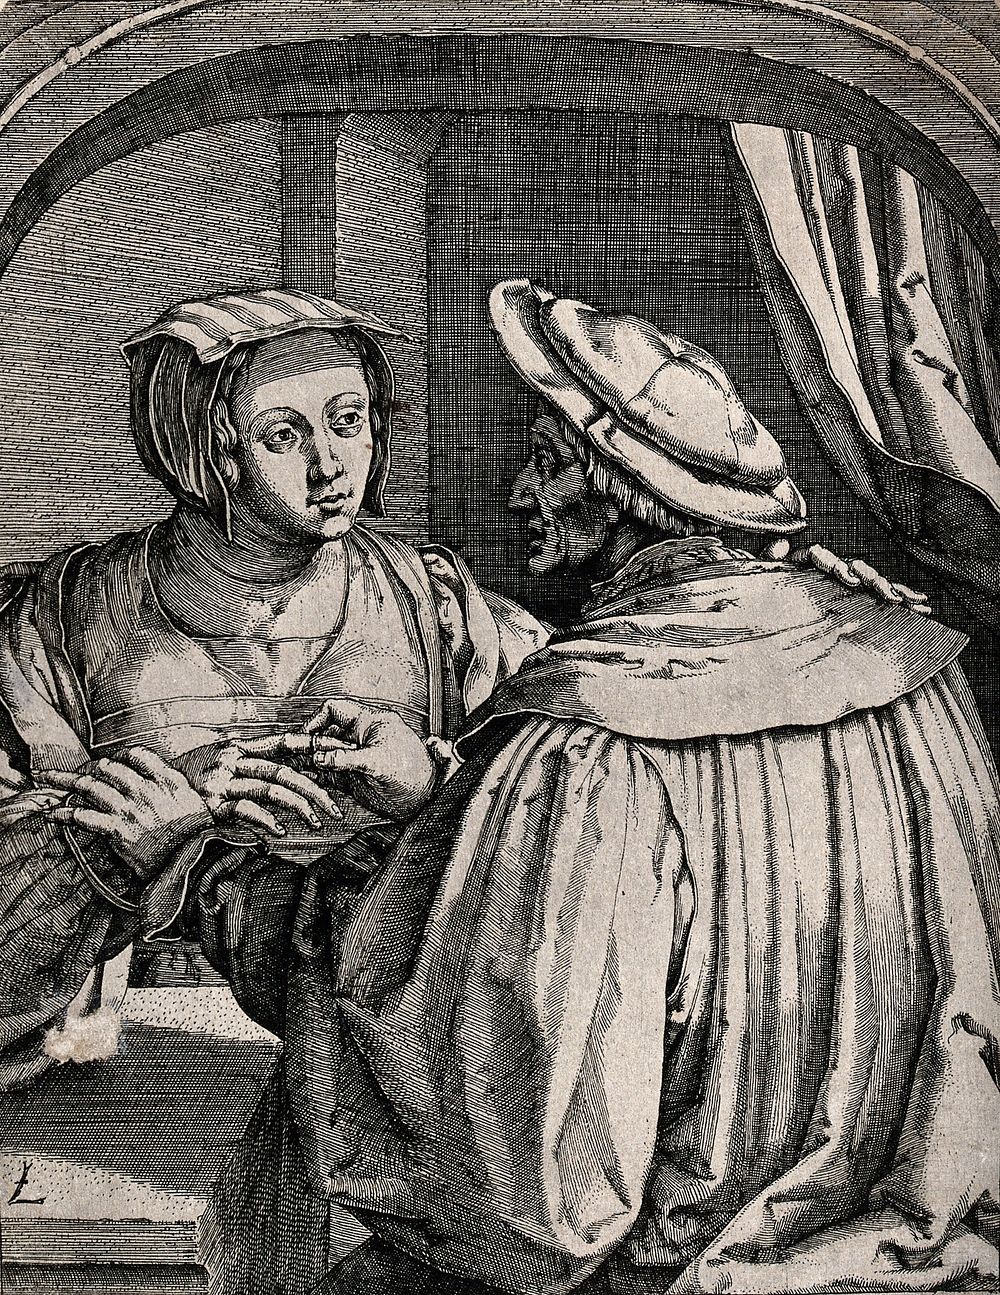 A man holds a woman's wrist and places a ring on her finger. Engraving.